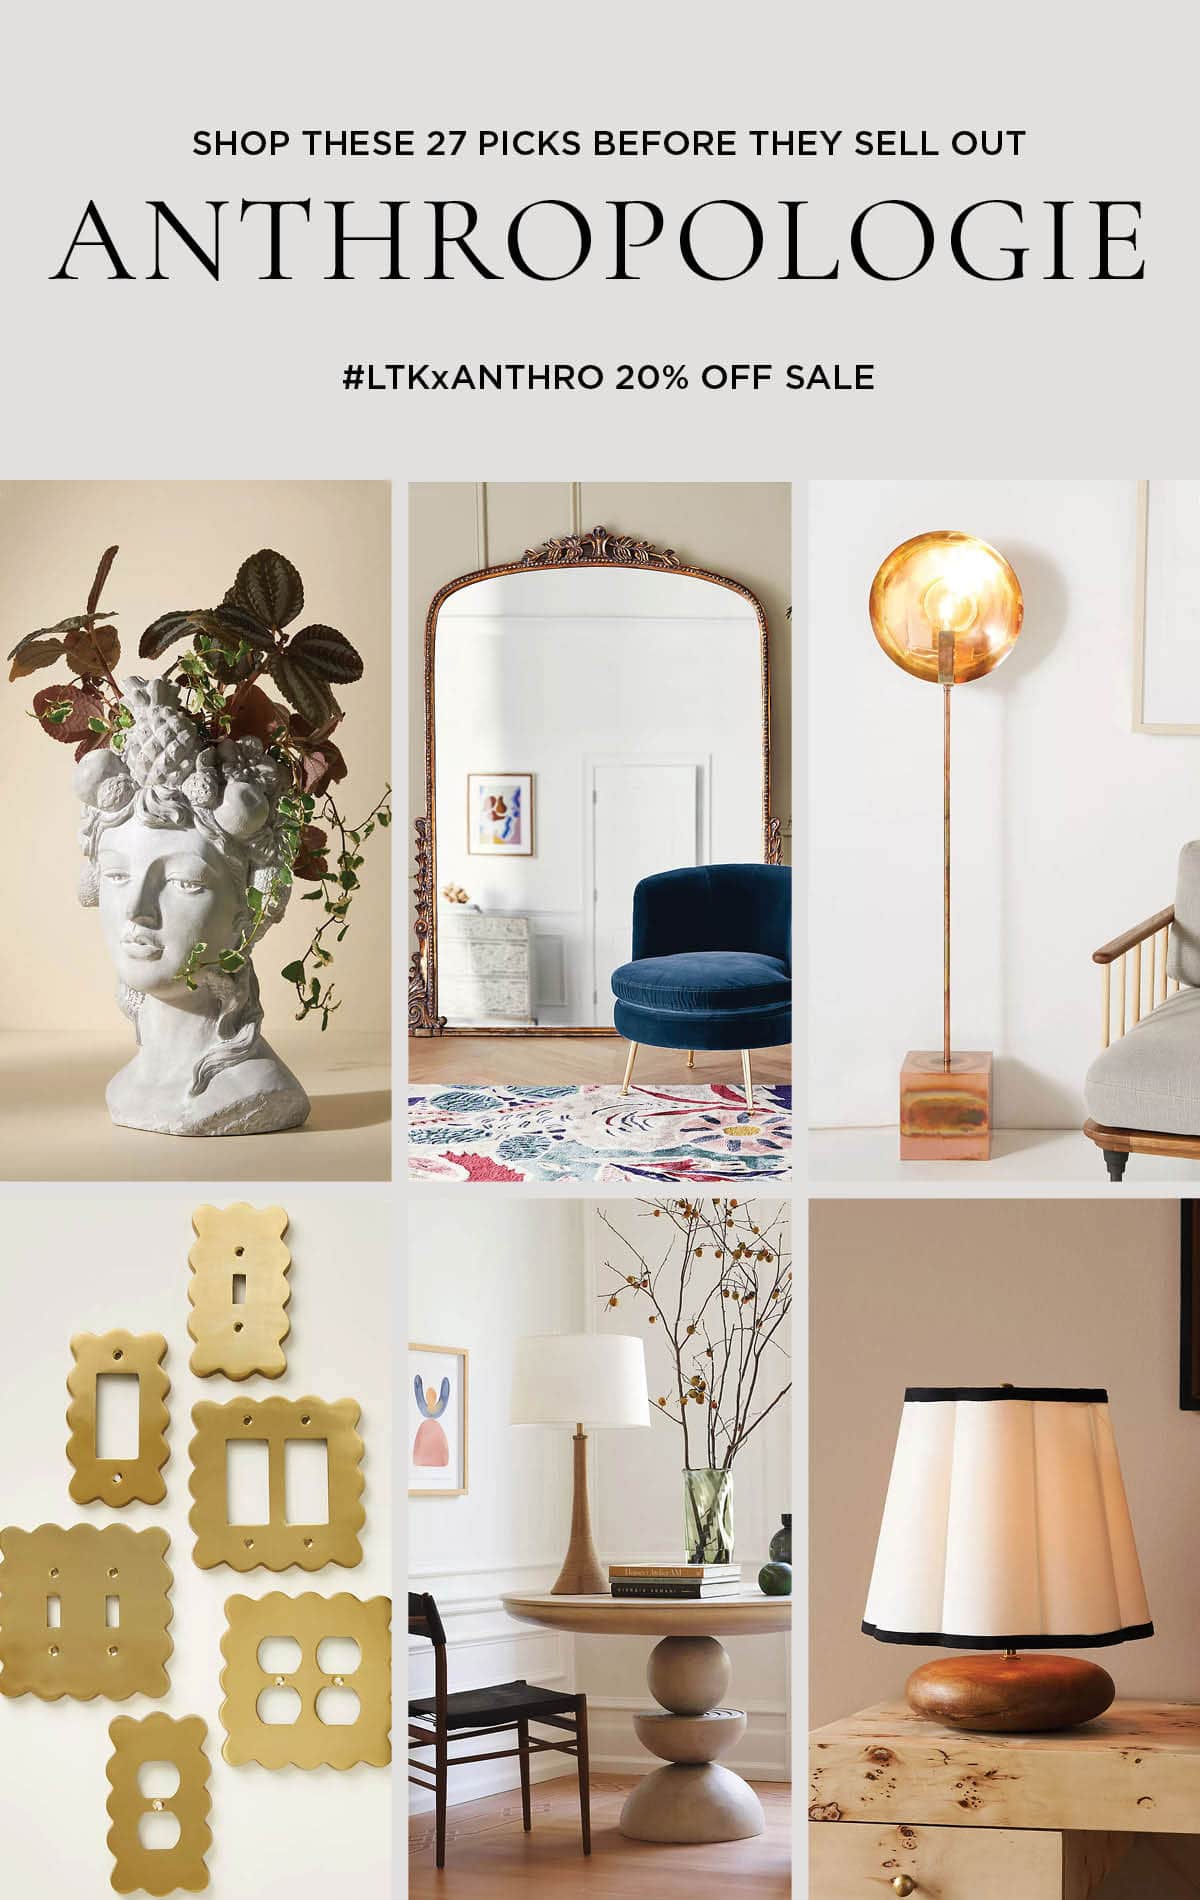 Sale Alert! Shop These 27 Anthro's Pieces Before They Sell Out - Shop these top home decor picks during the the #LTKxAnthro 20% off sale.